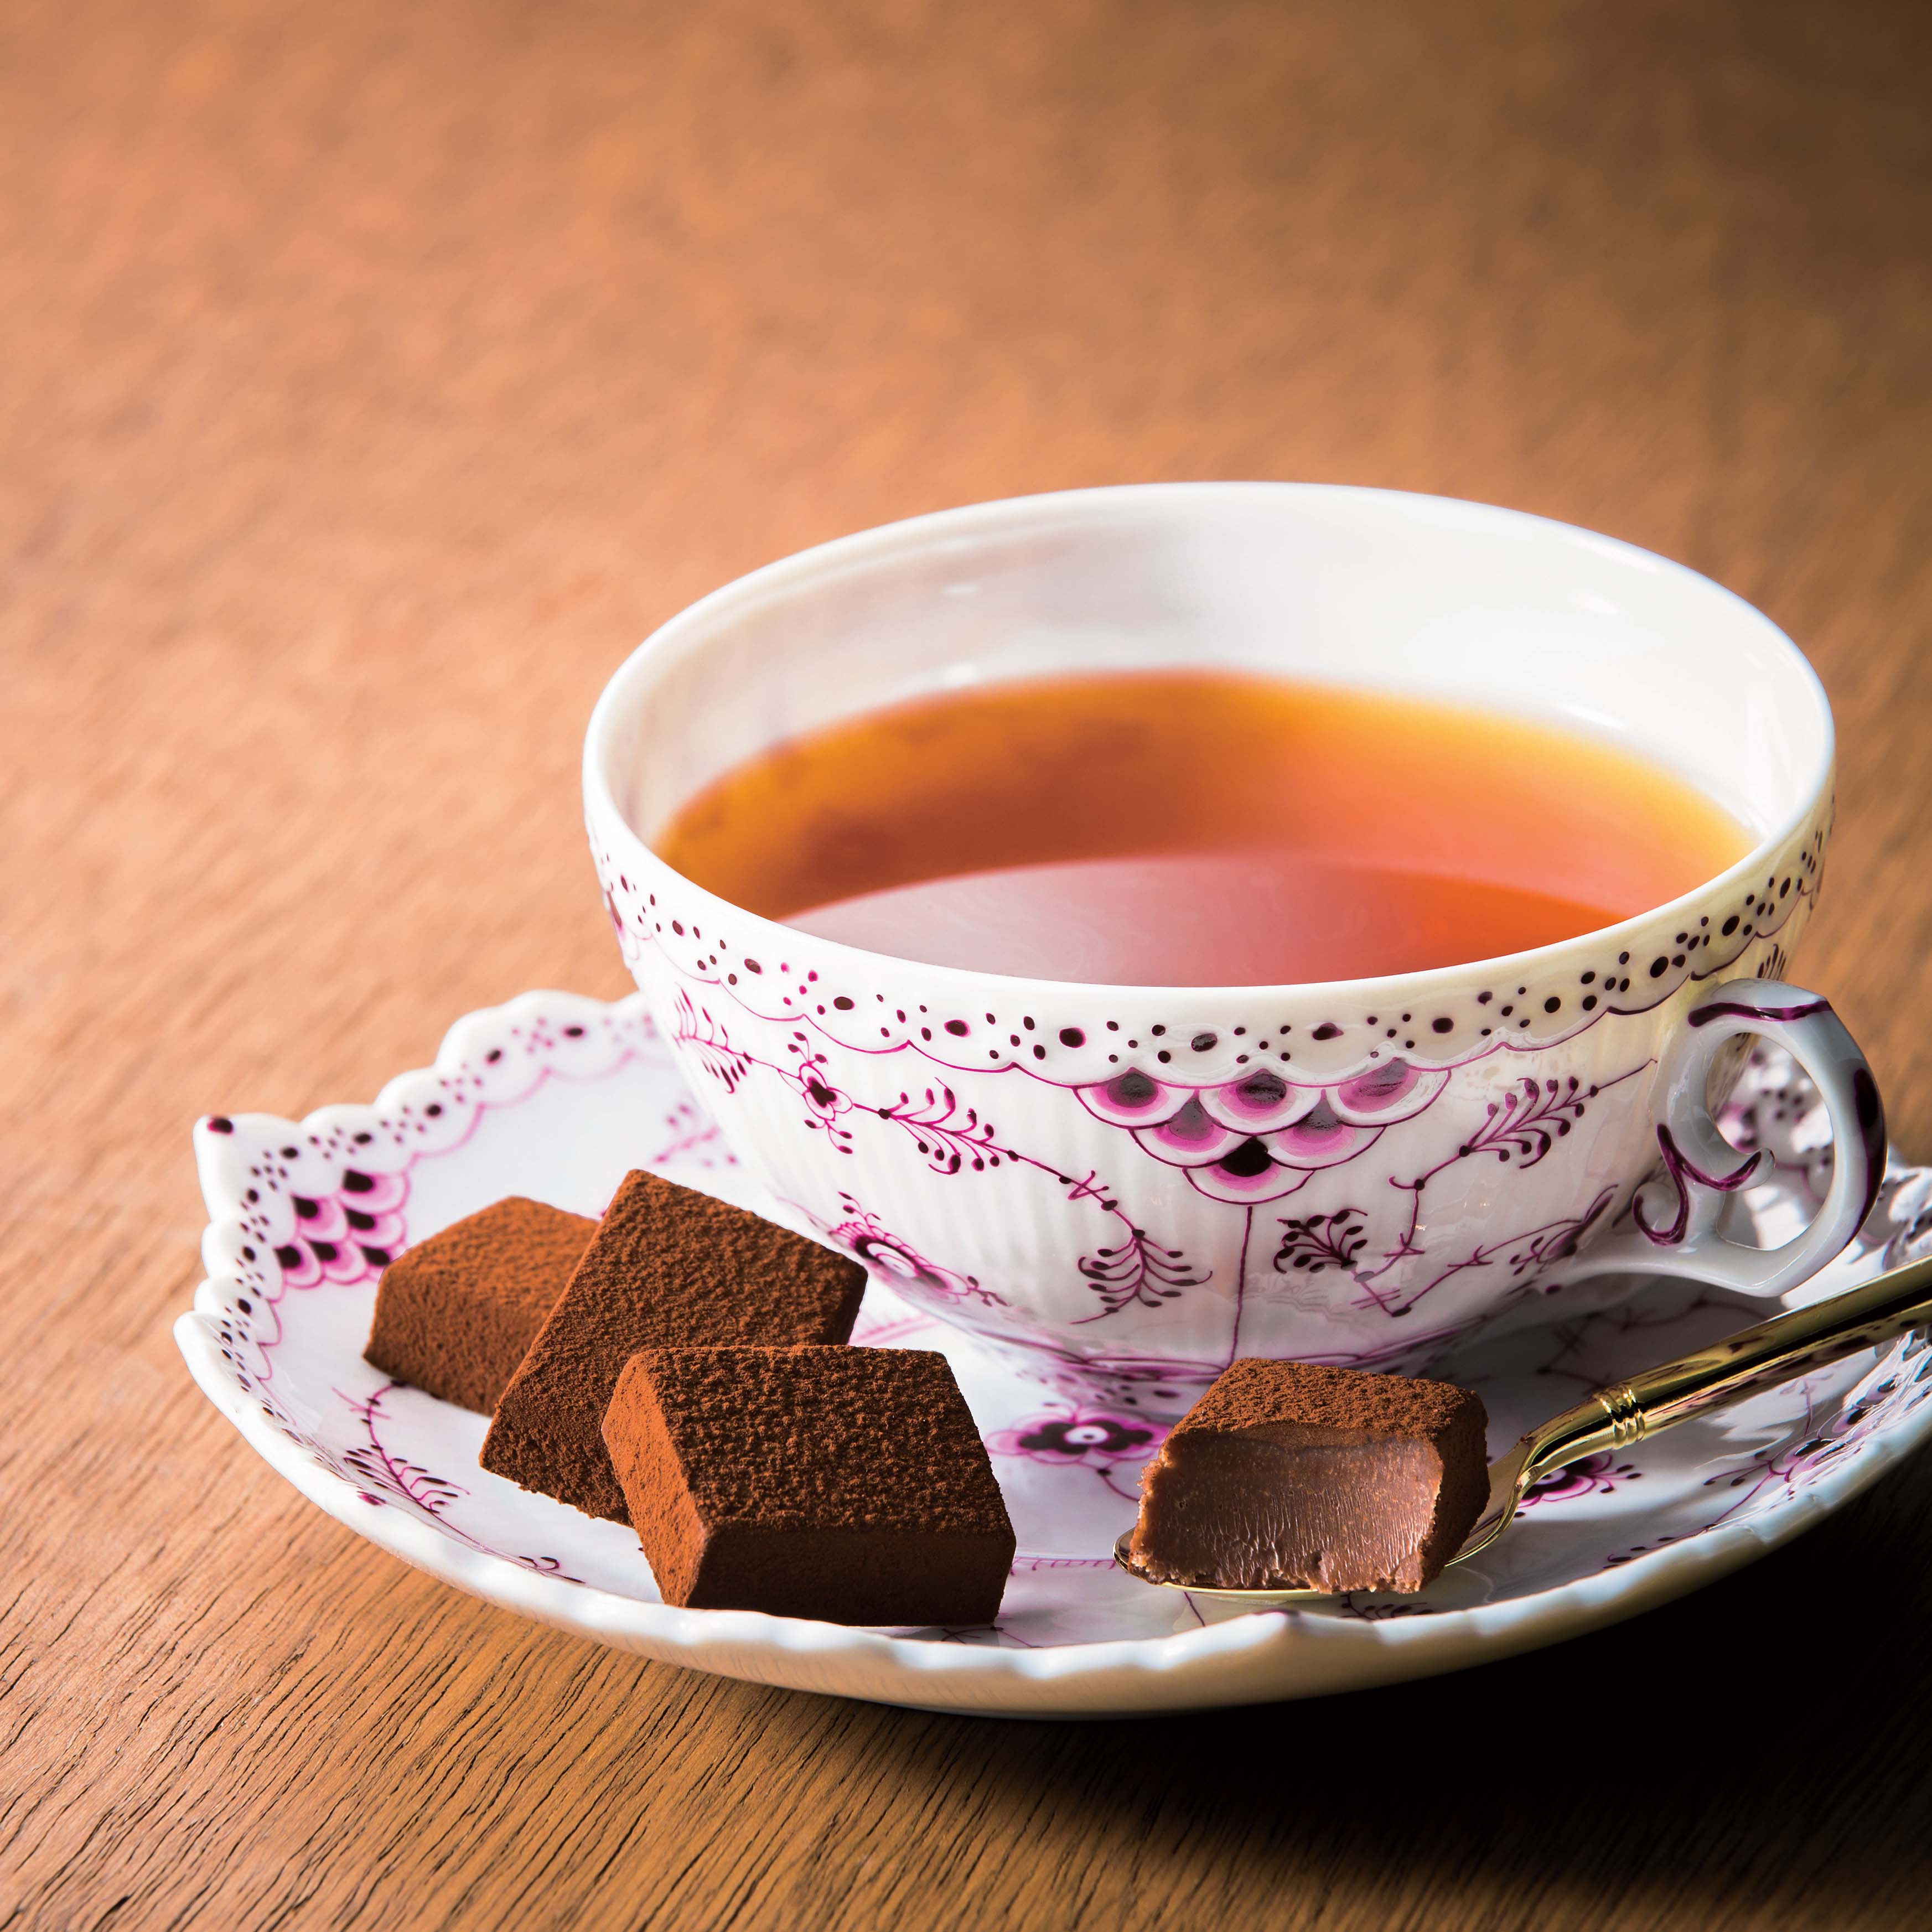 ROYCE' Chocolate - Image shows chocolate blocks on a plate with a cup of tea.